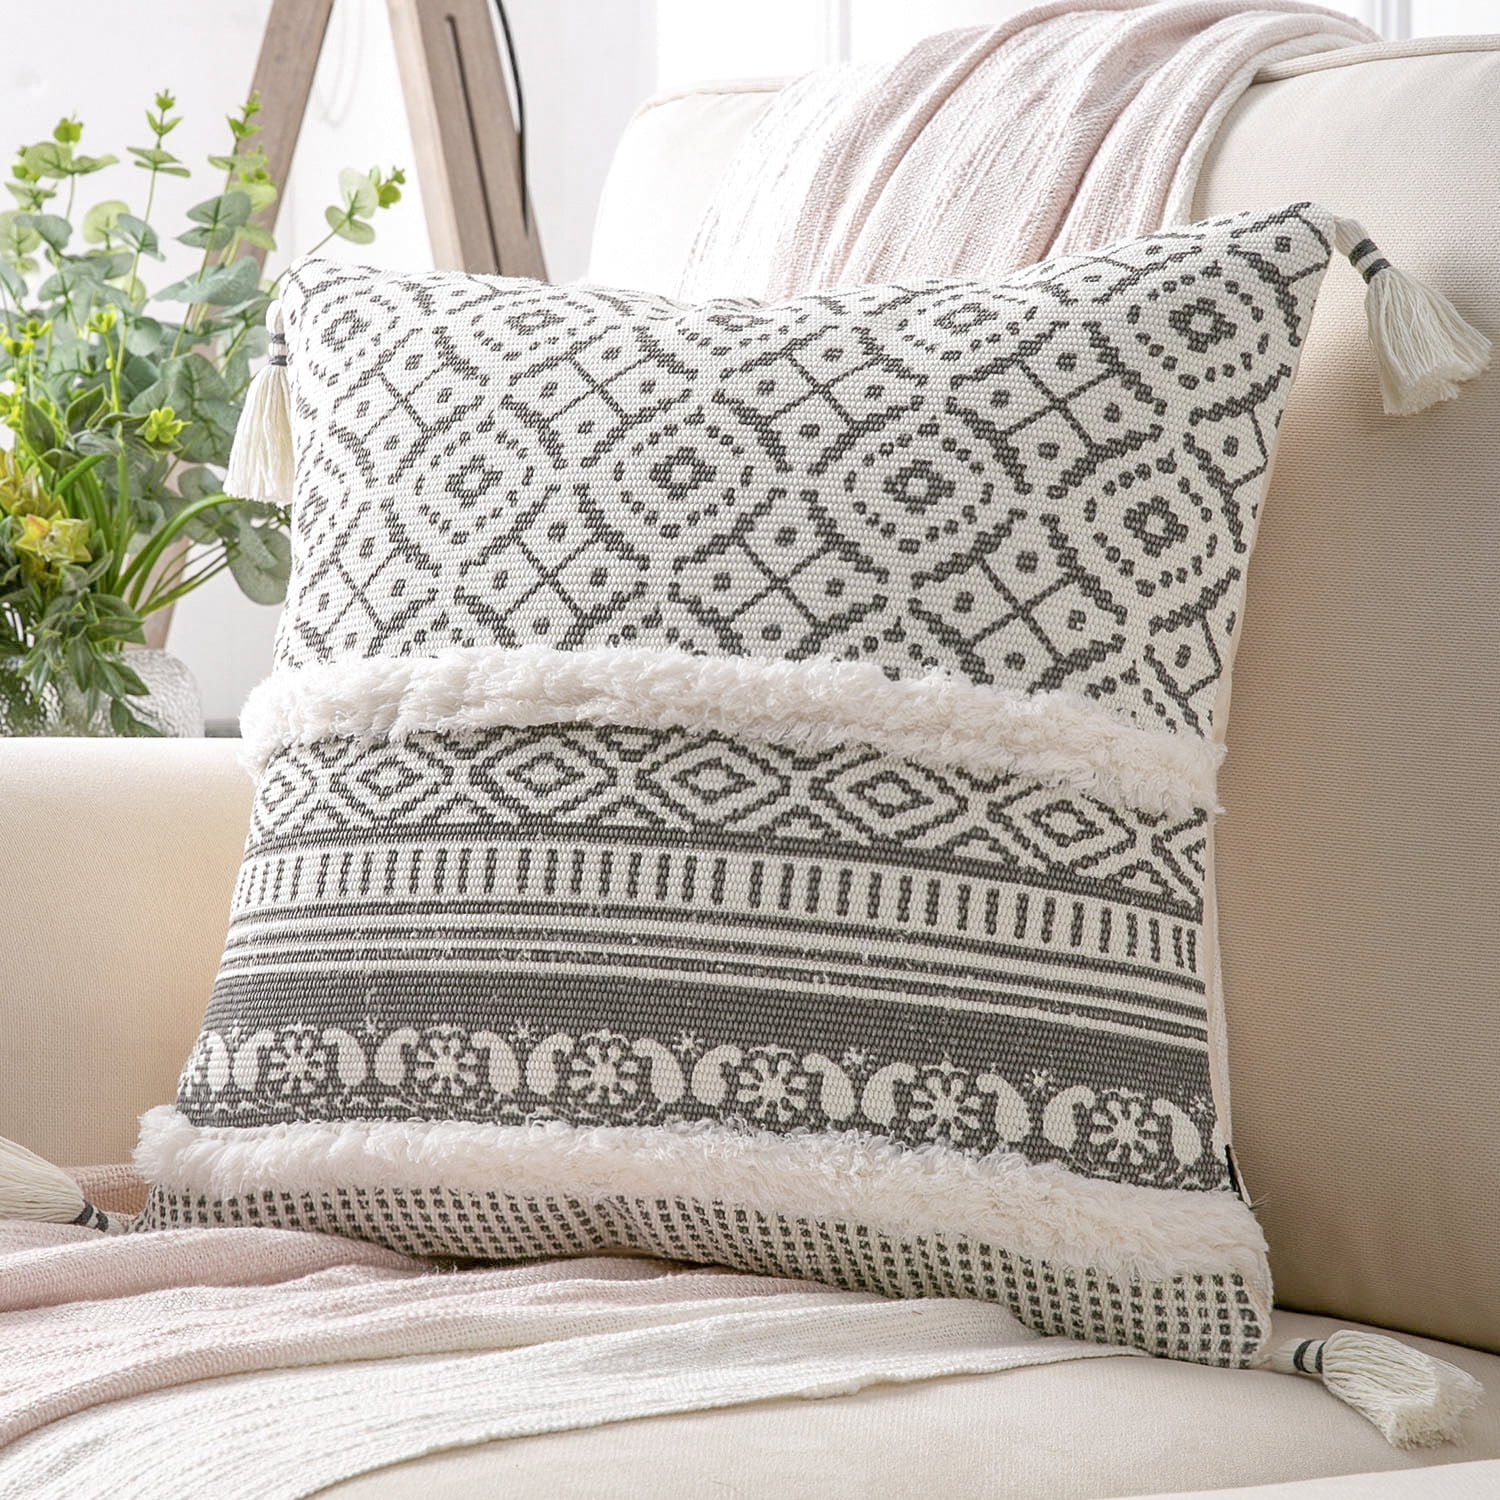 Merrycolor Boho Throw Pillow Covers 18x18 with Tassels White and Grey  Decorative Throw Pillows Woven Tufted Pillowcase Modern Accent Bohemian  Square